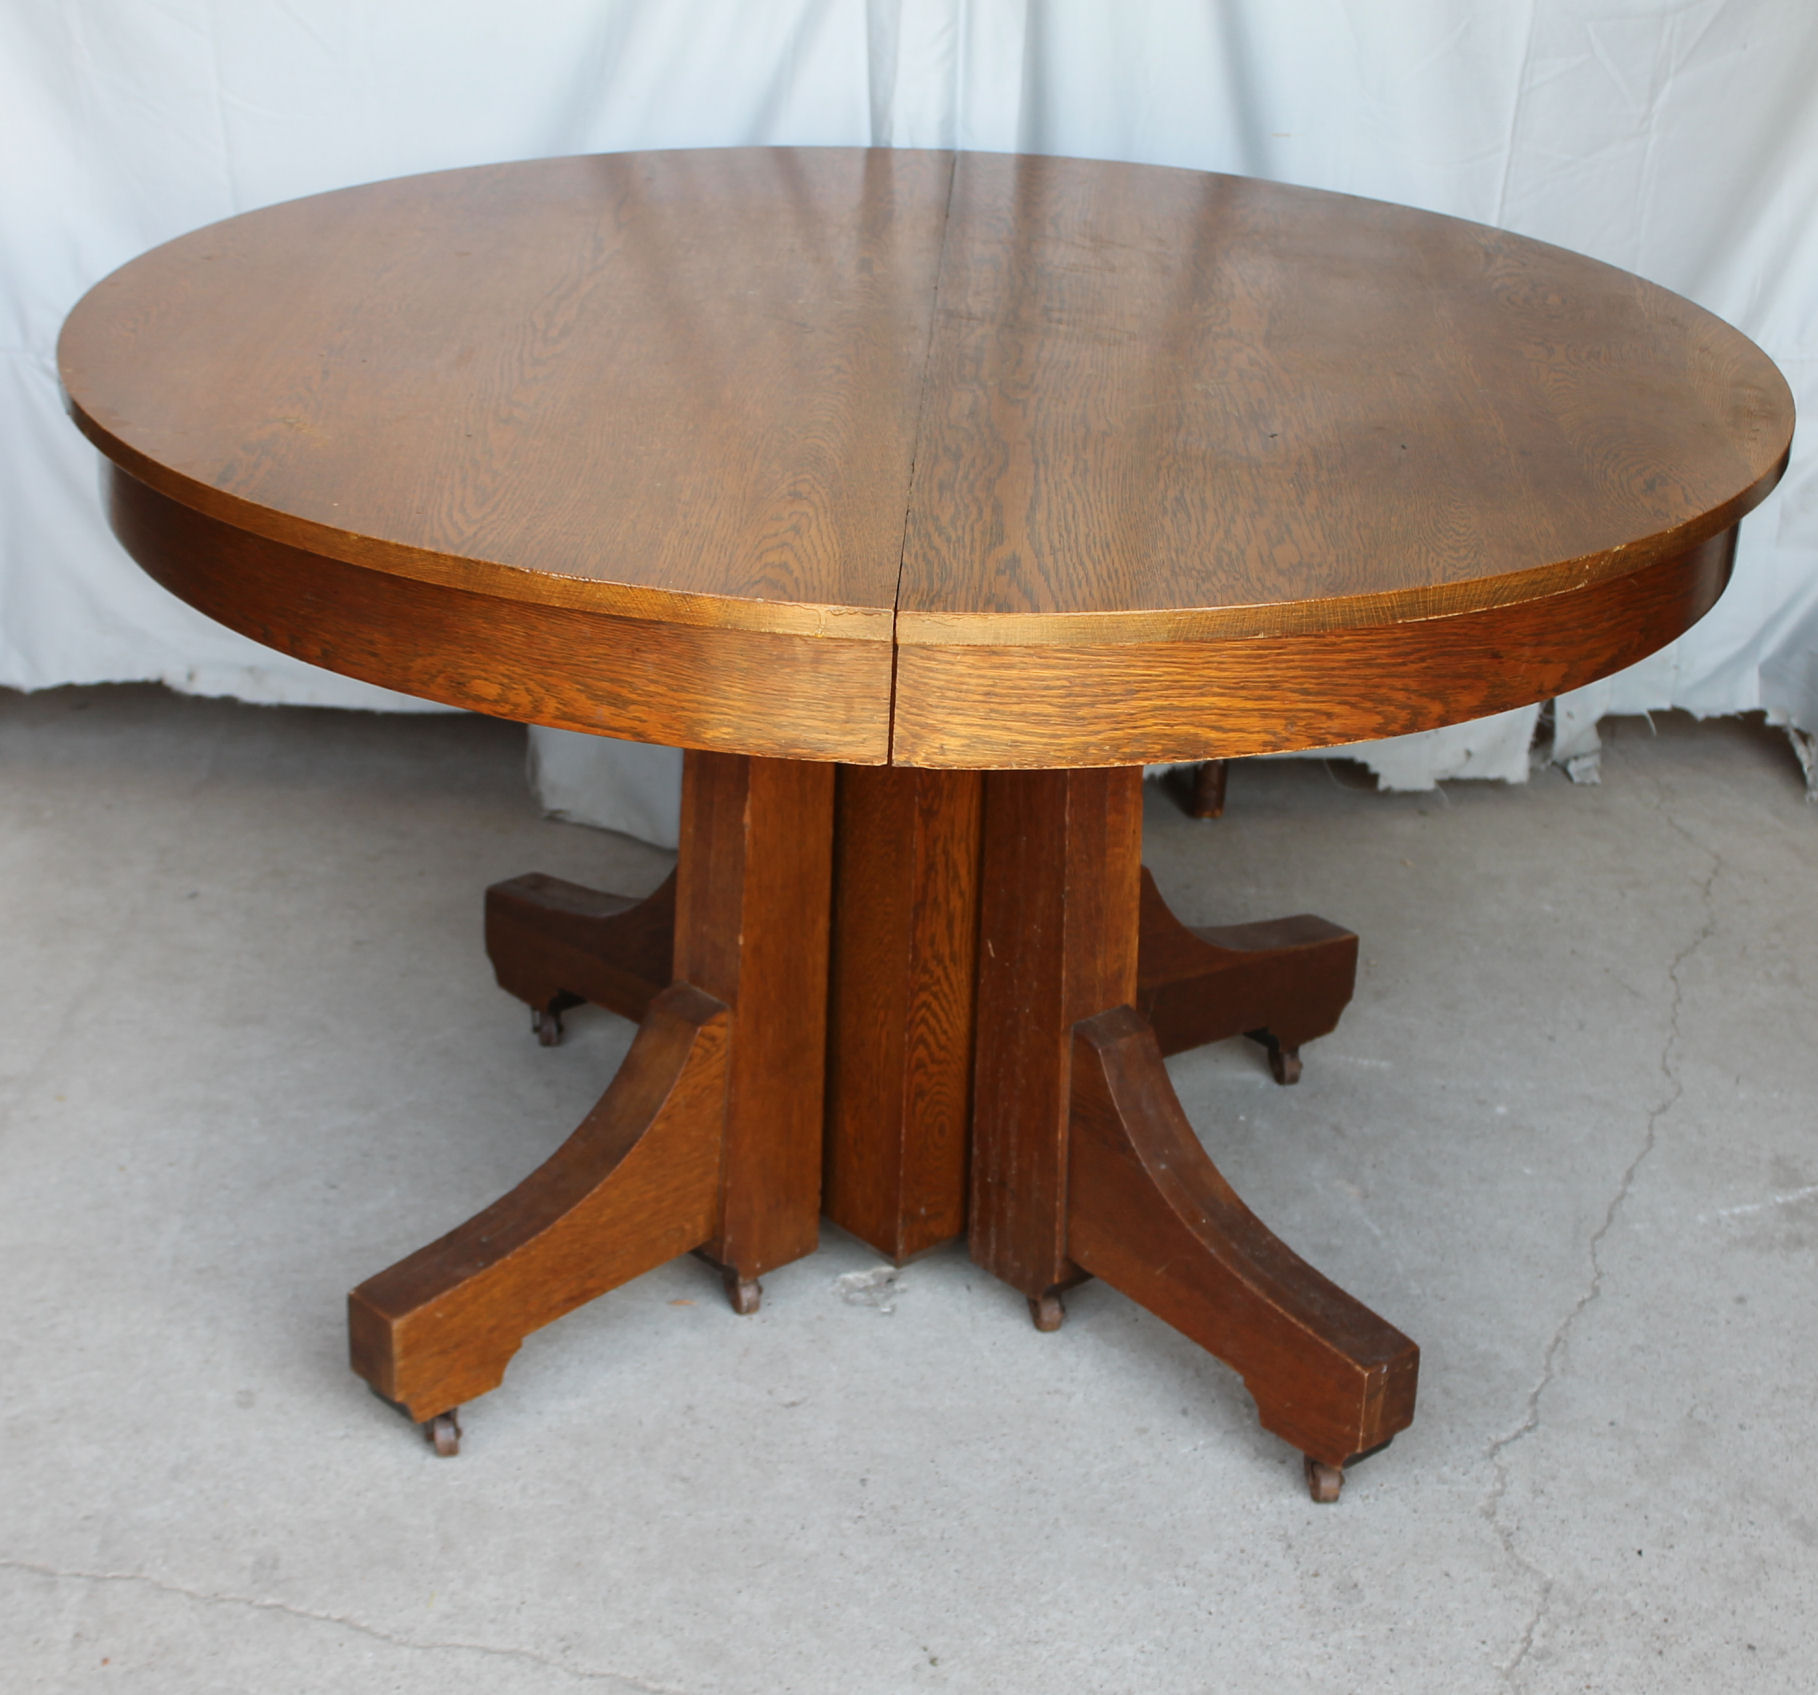 Antique Mission Style Round Oak Table, Oak Round Dining Table With Leaf